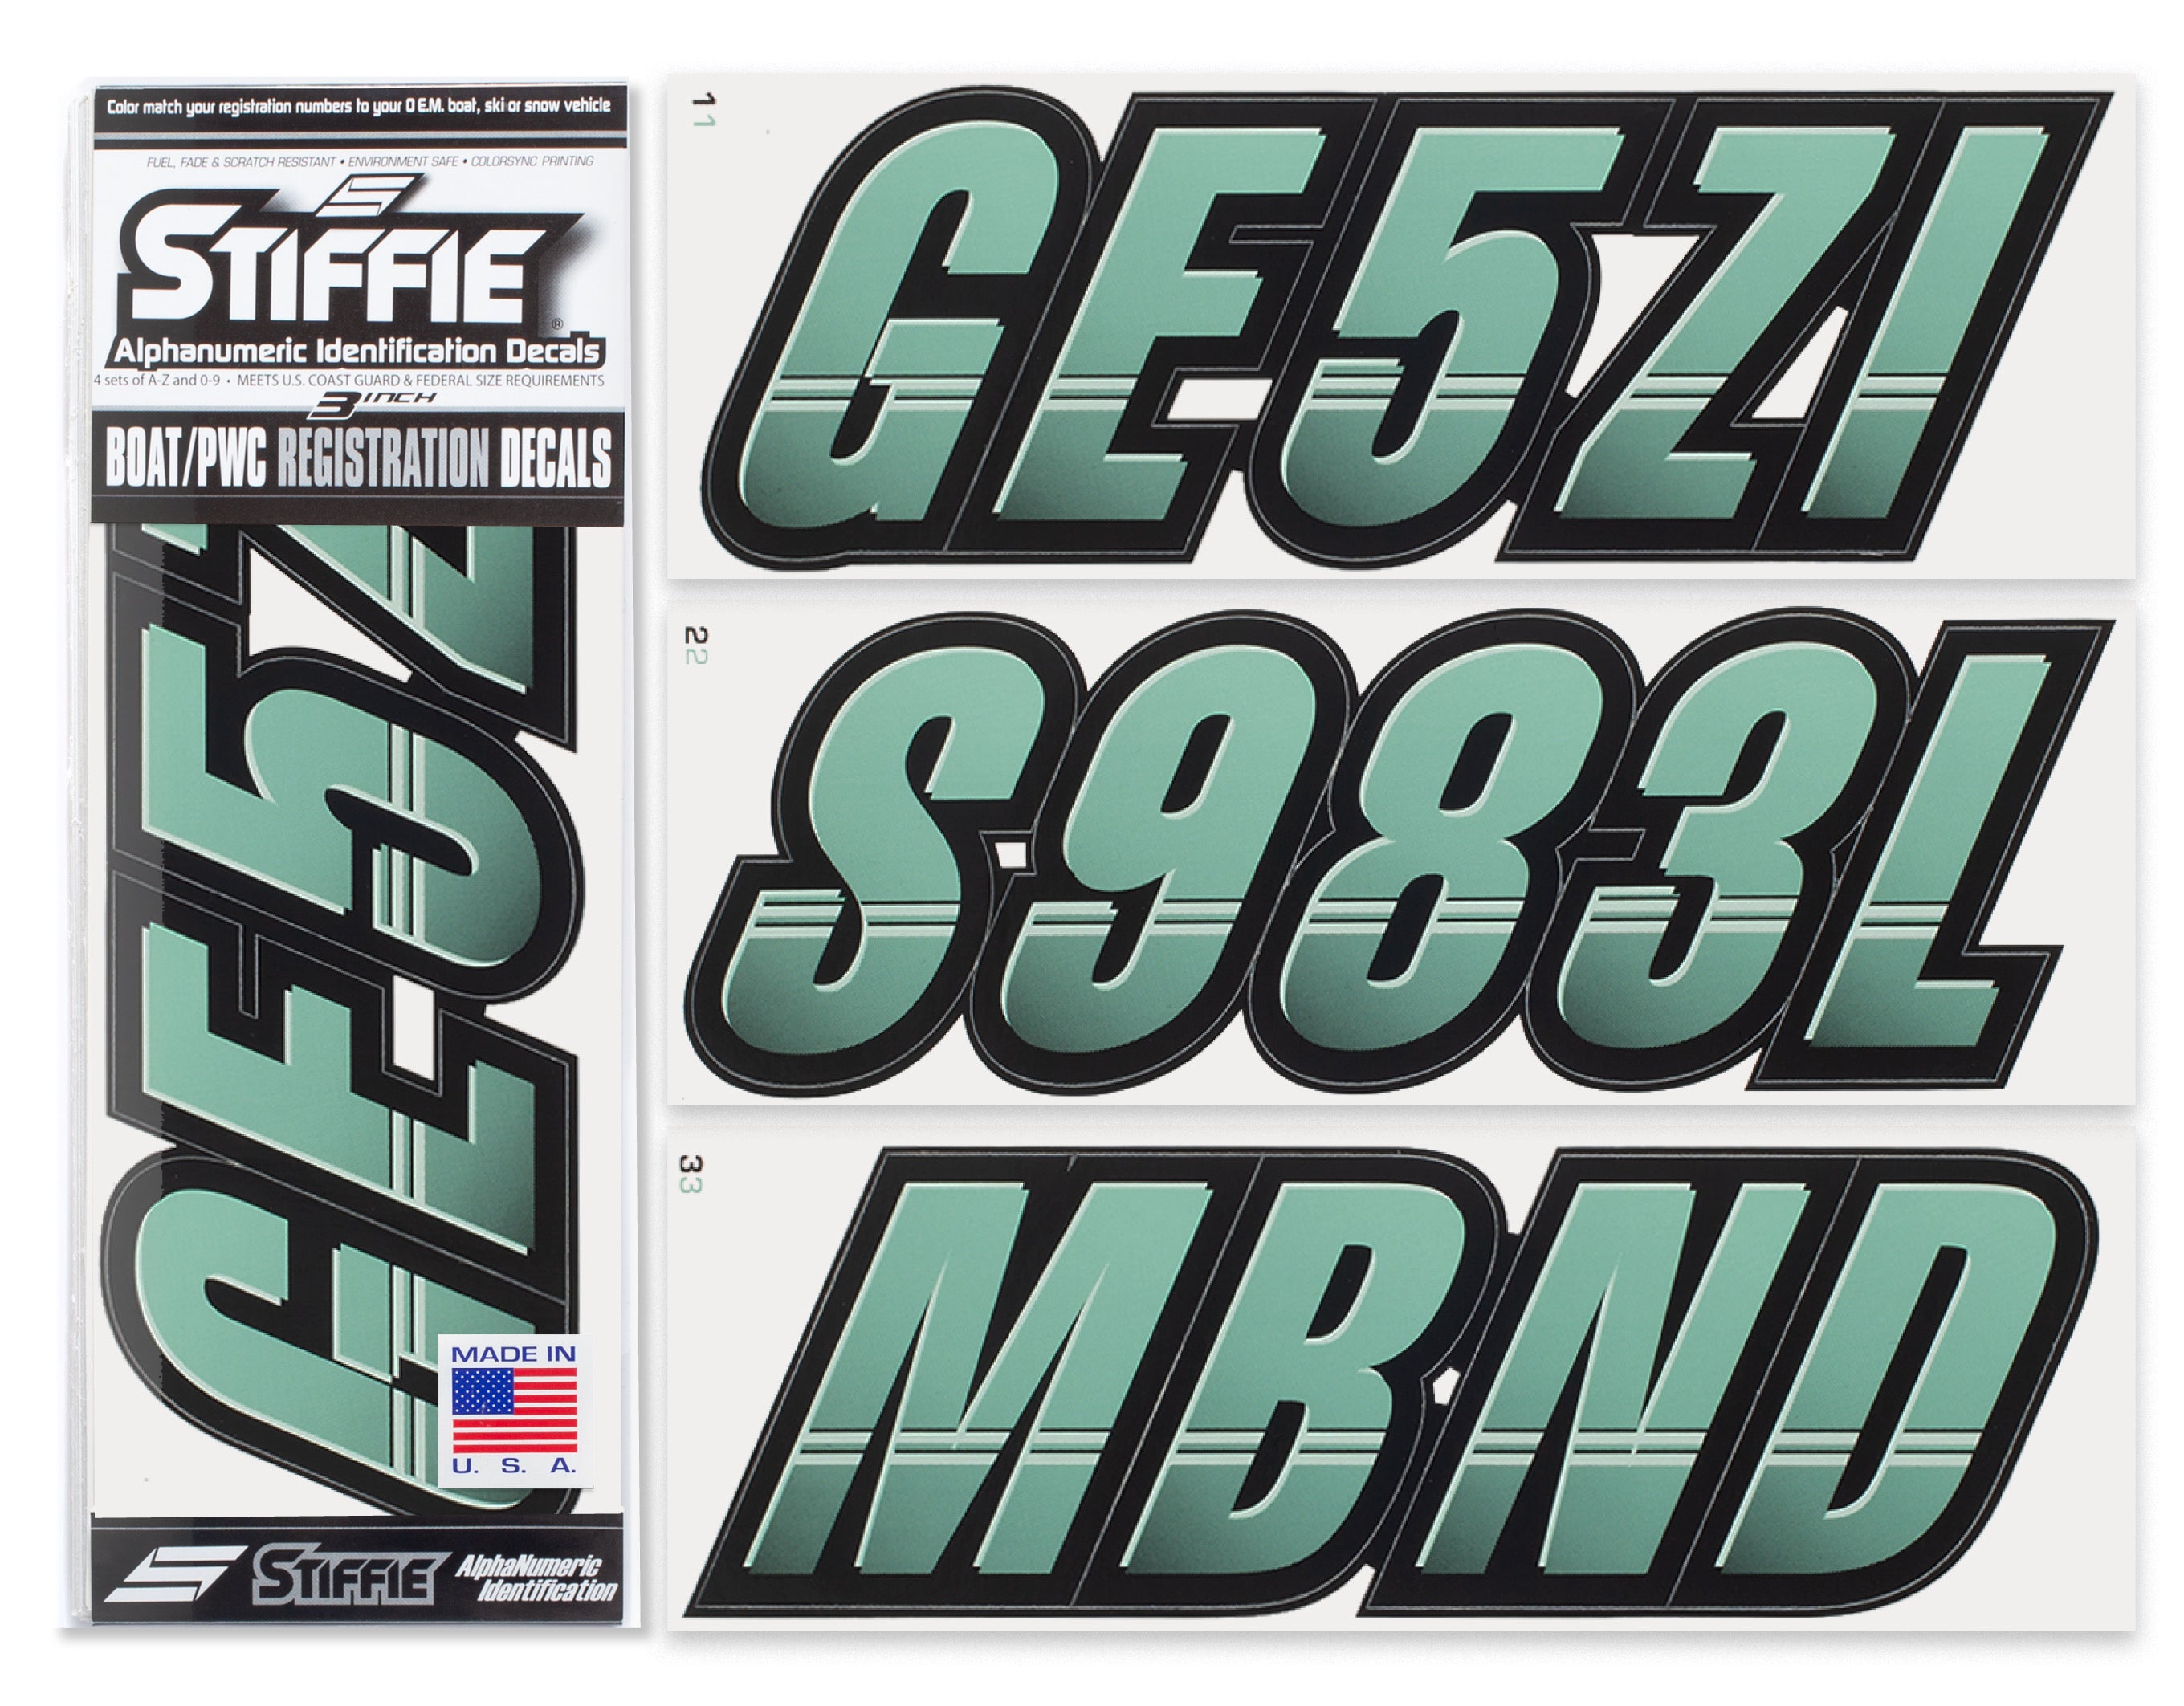 Stiffie Techtron Cozumel/Black 3" Alpha-Numeric Registration Identification Numbers Stickers Decals for Boats & Personal Watercraft